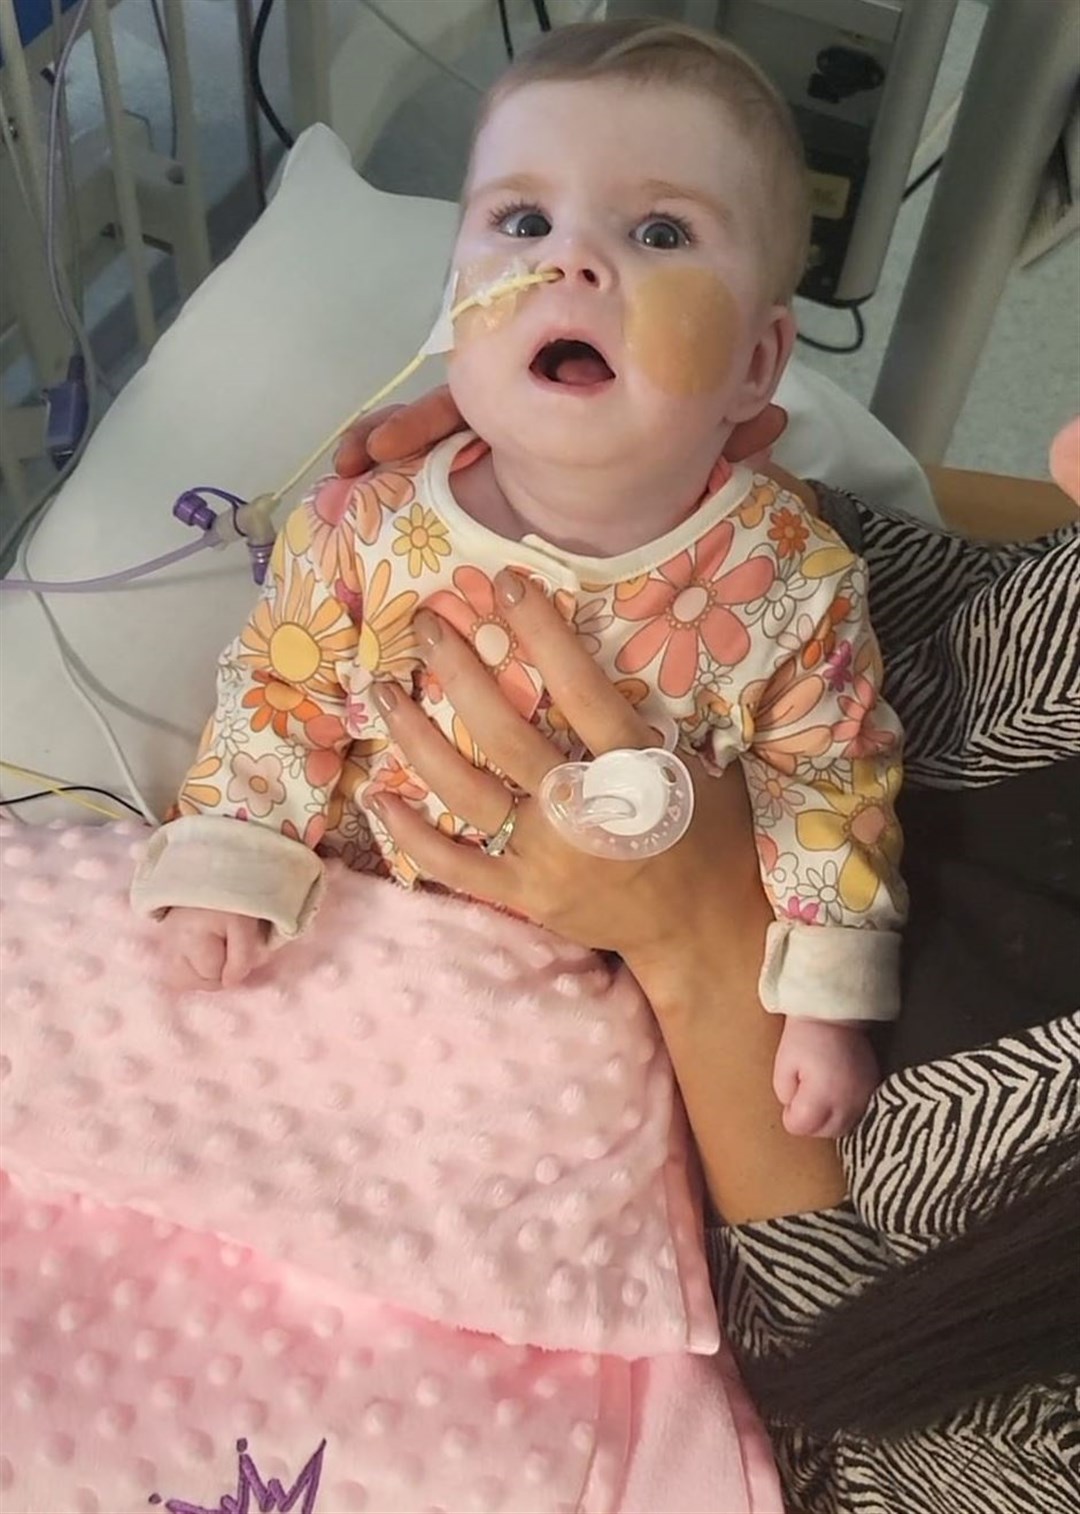 Eight-month-old Indi Gregory has been at the heart of a High Court life-support fight (Family handout/PA)